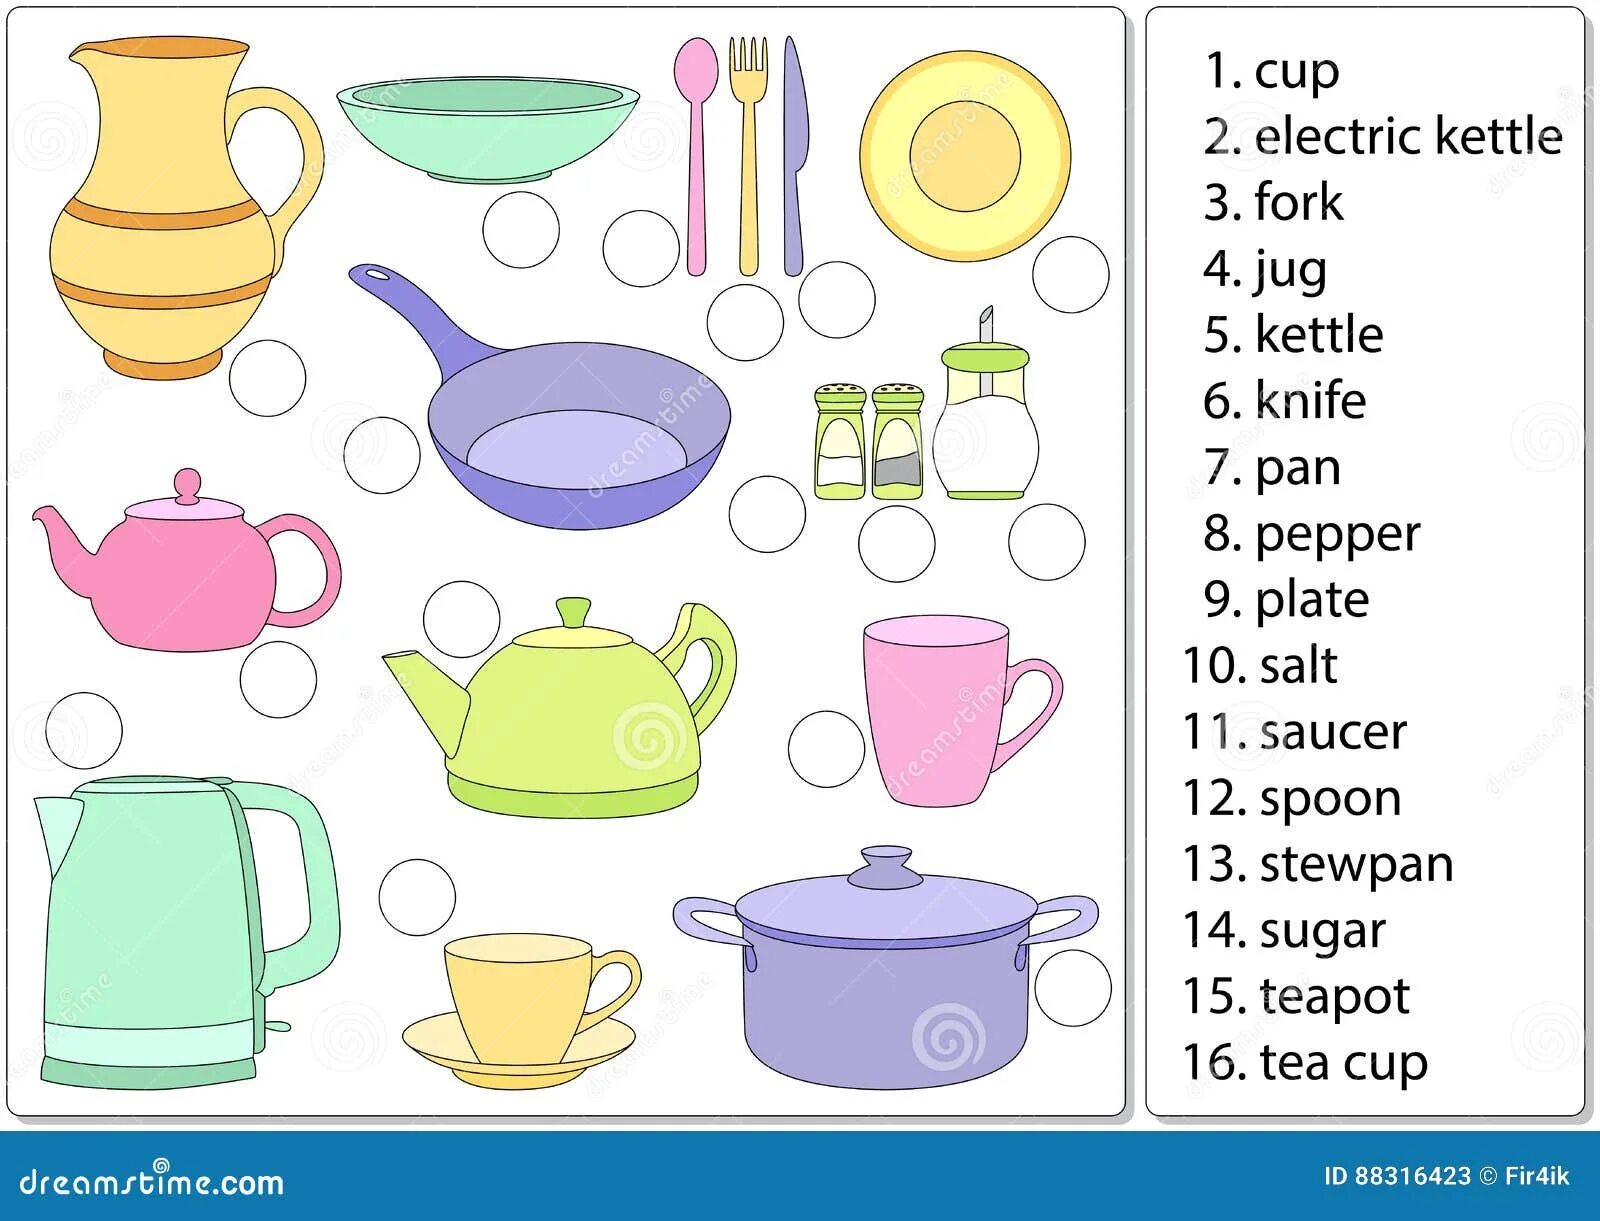 Cups pdf. Посуда Worksheets for Kids. Посуда по англ. Tableware for Kids. Tableware for Kids in Worksheets.